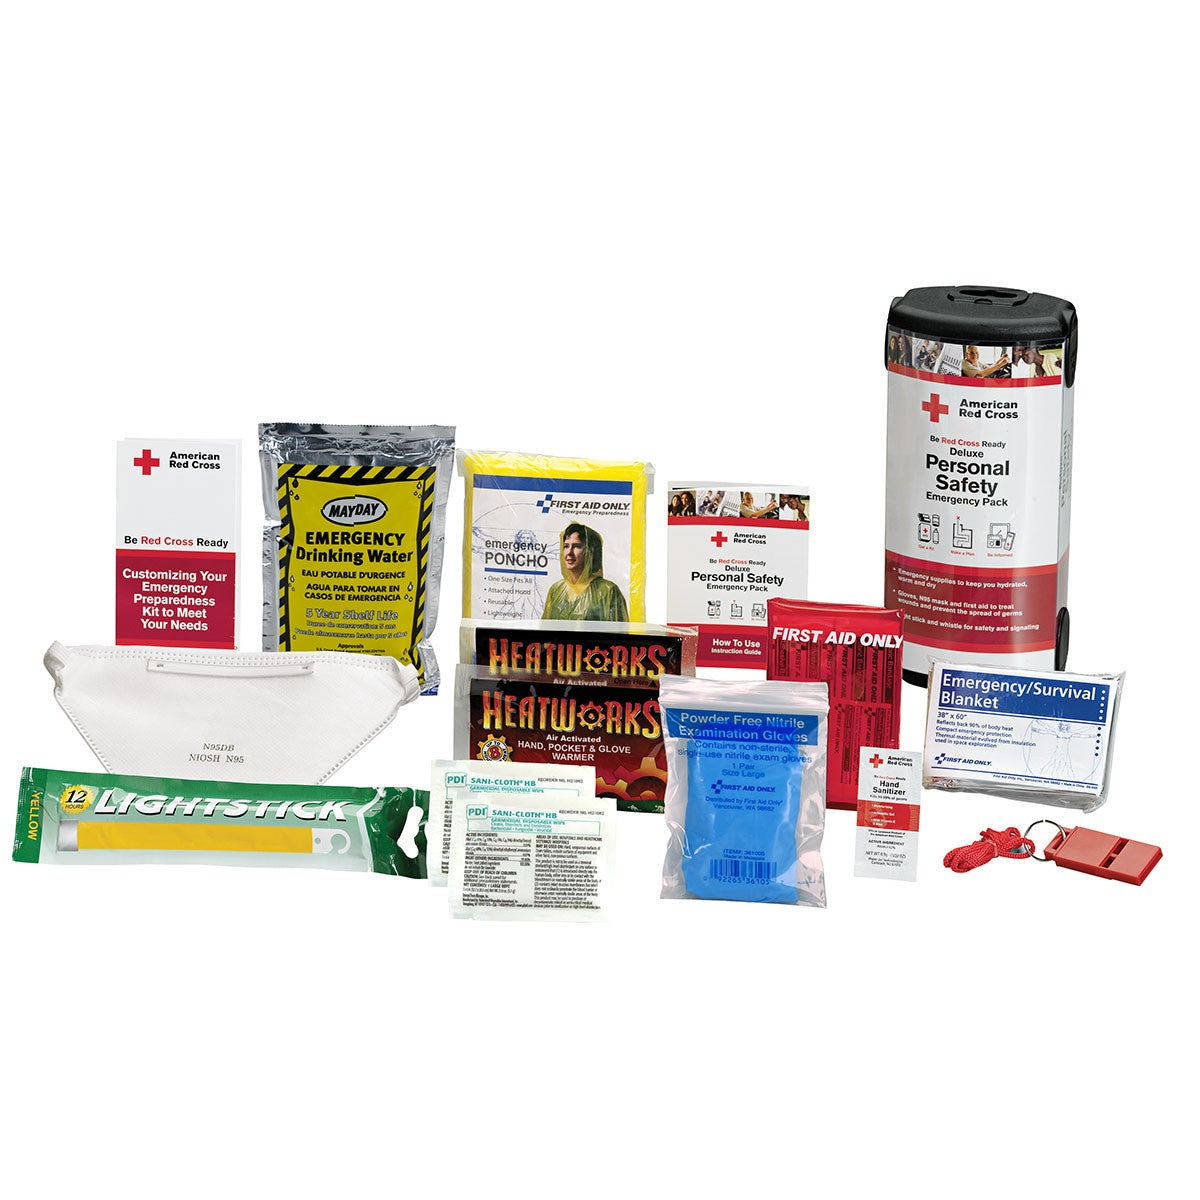 American Red Cross Deluxe Personal Safety Emergency Pack - W-RC-613